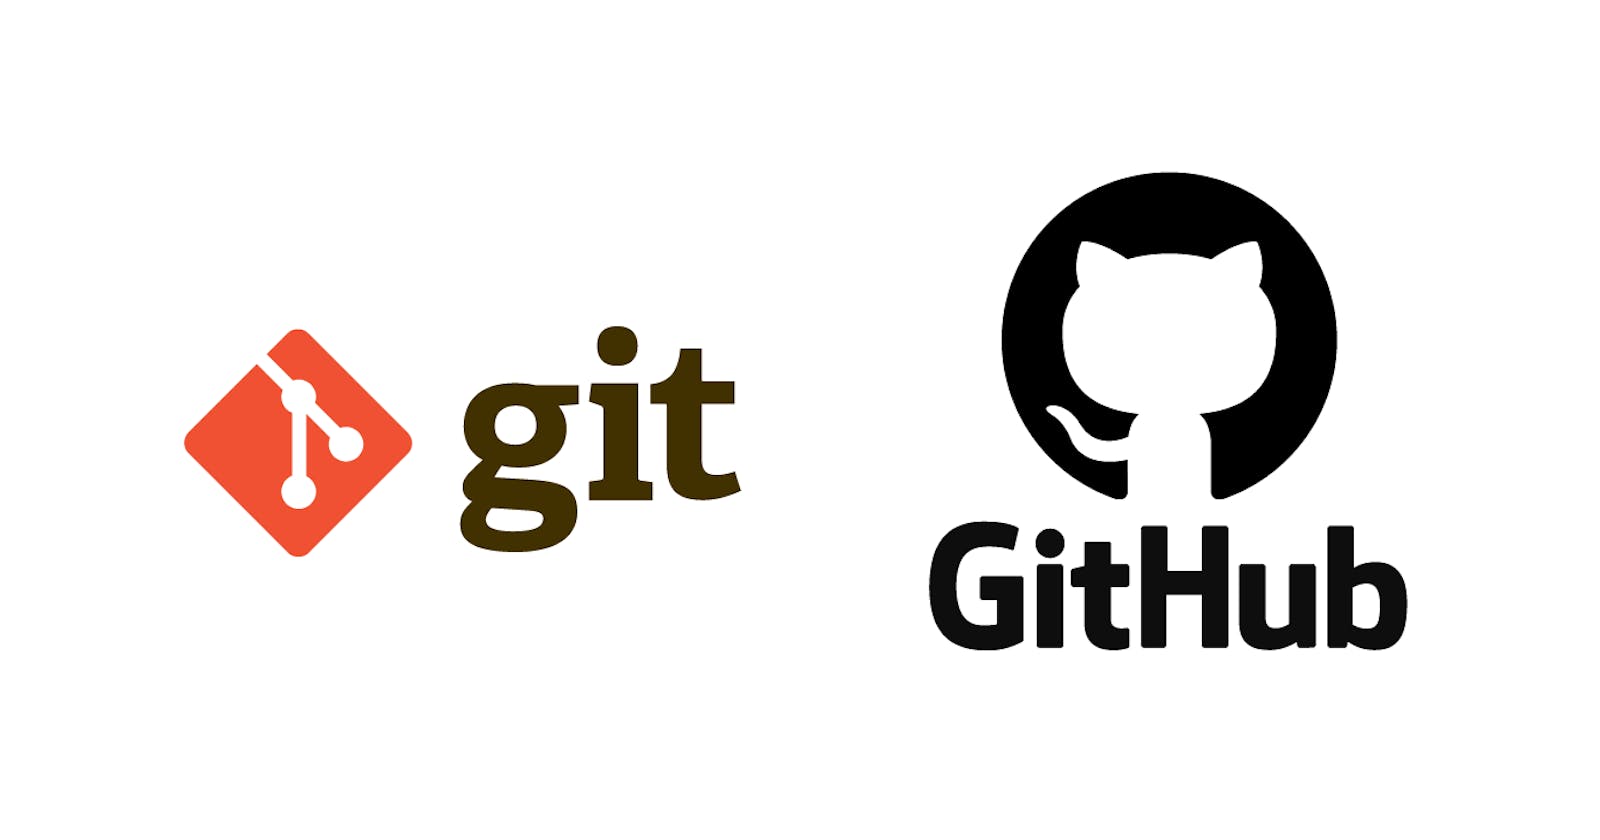 Getting Started with Git and GitHub:
A Beginner's Guide.